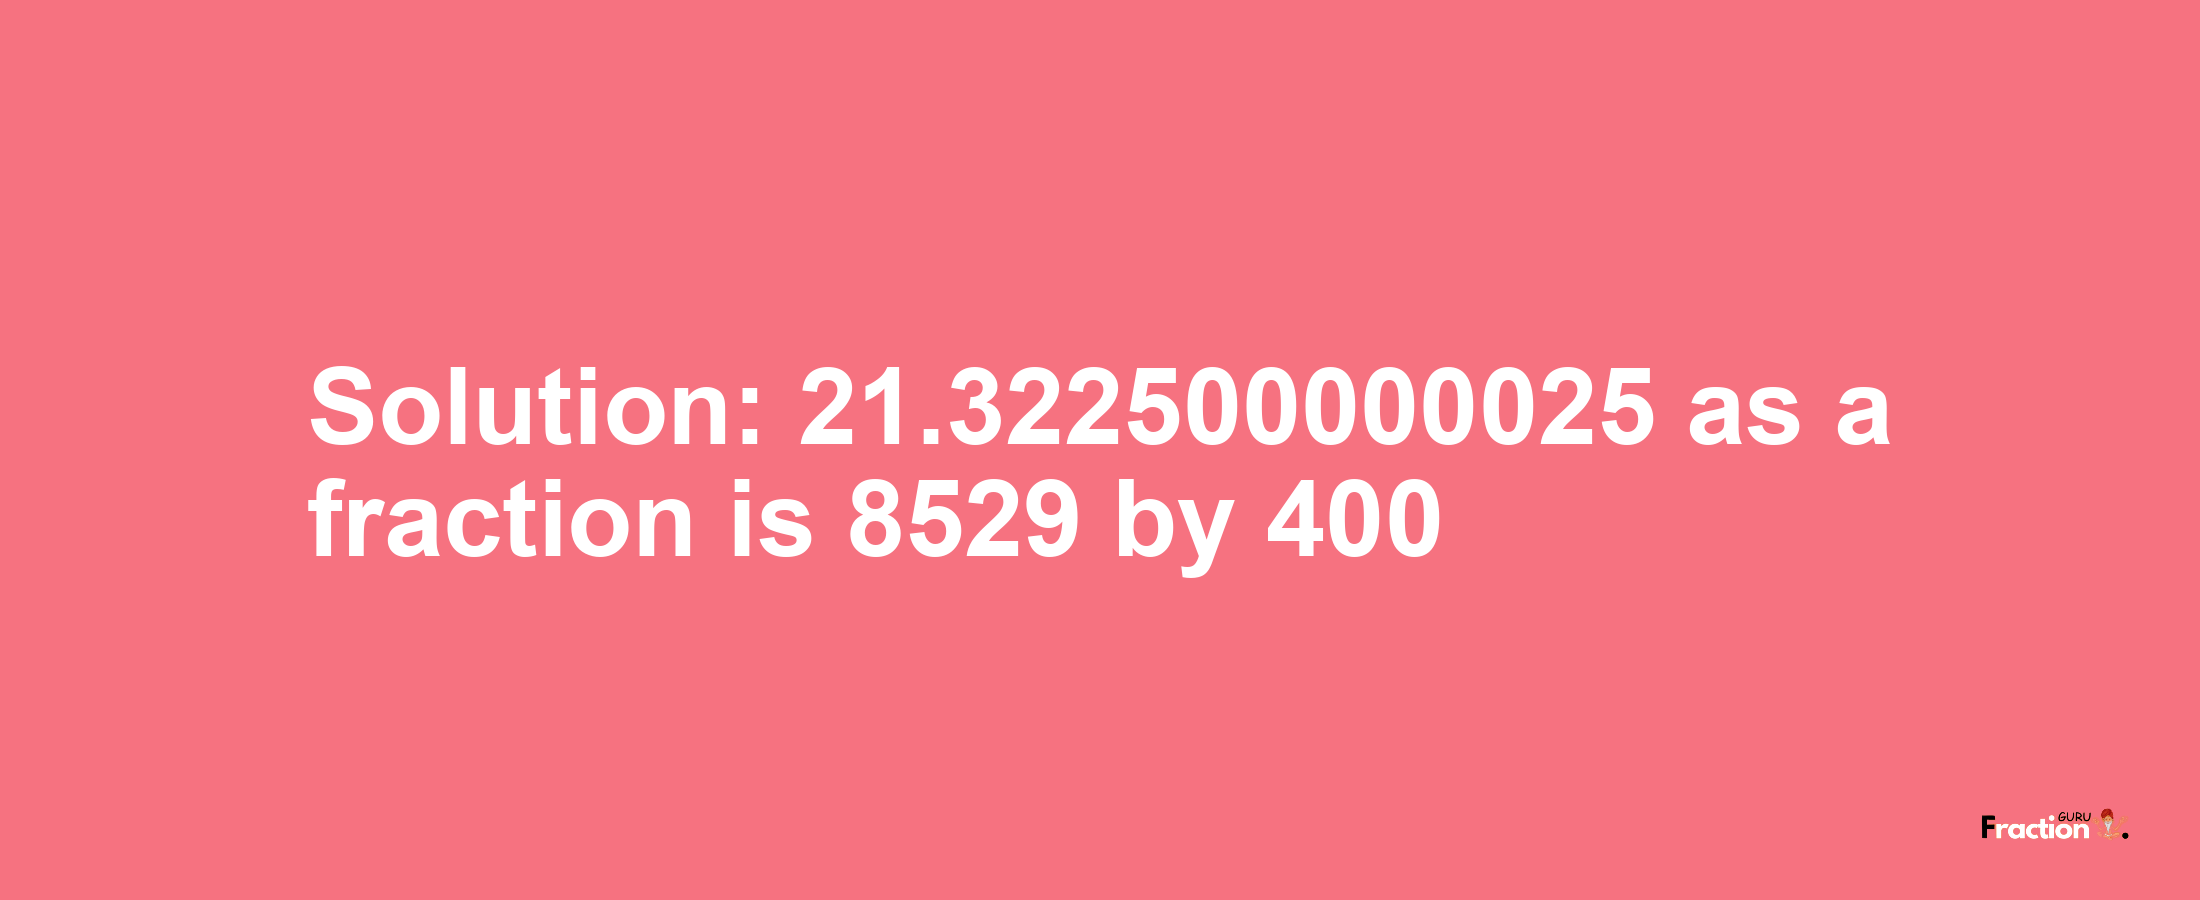 Solution:21.322500000025 as a fraction is 8529/400